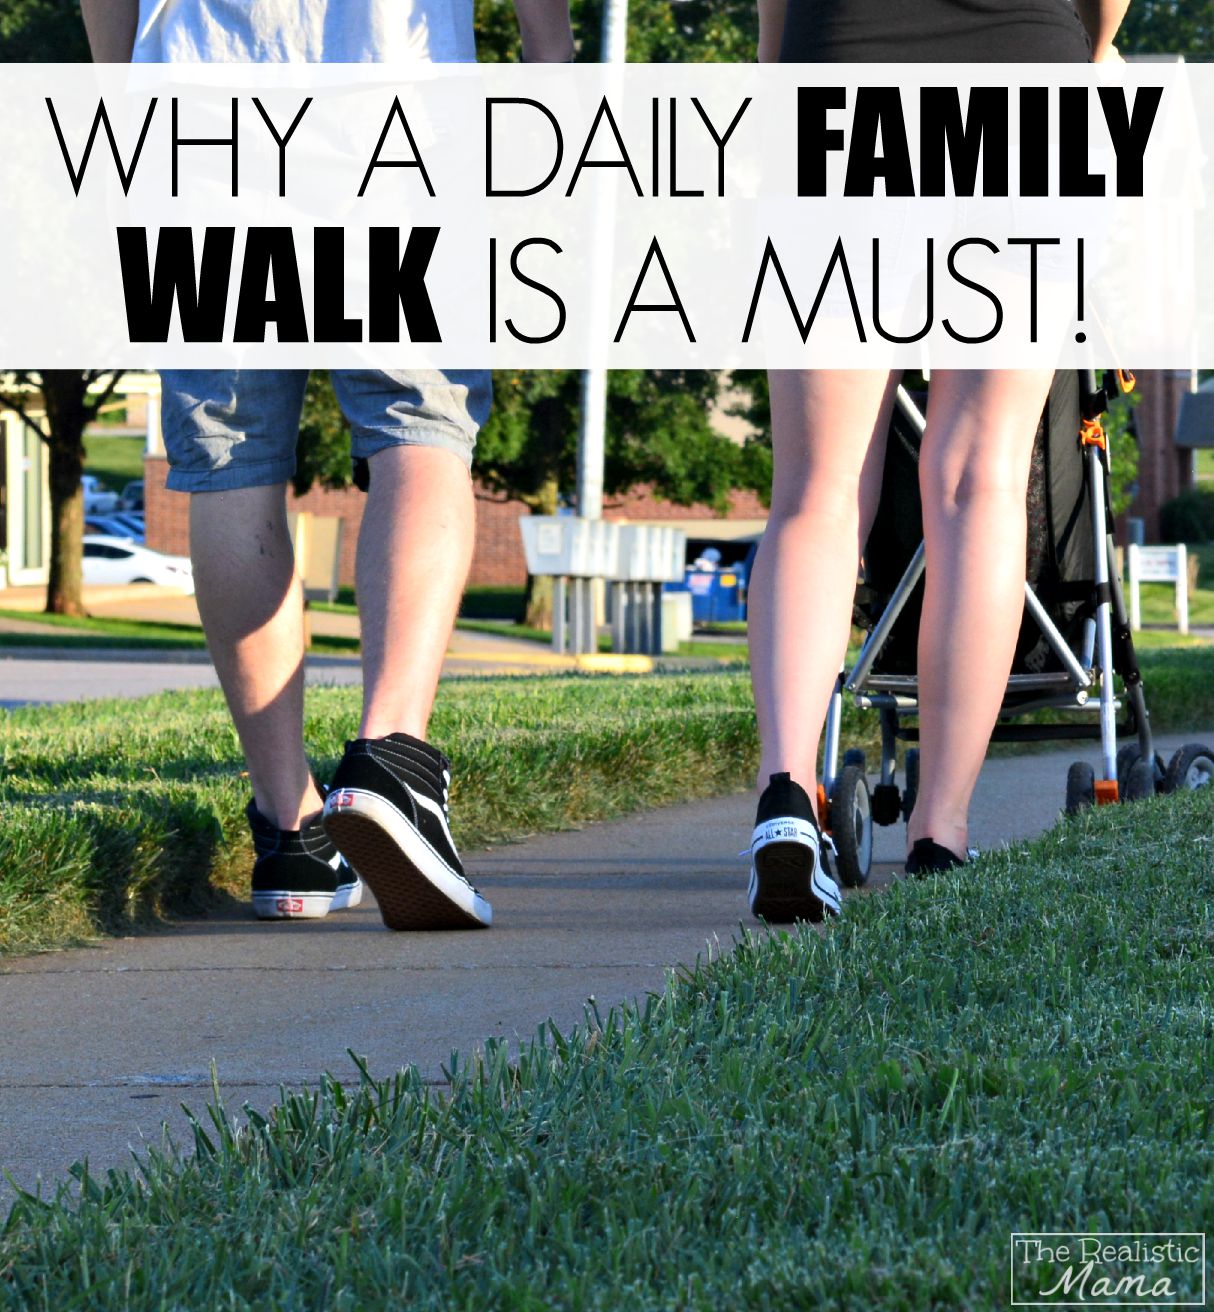 Why a family walk is a must. The benefits might surprise you!